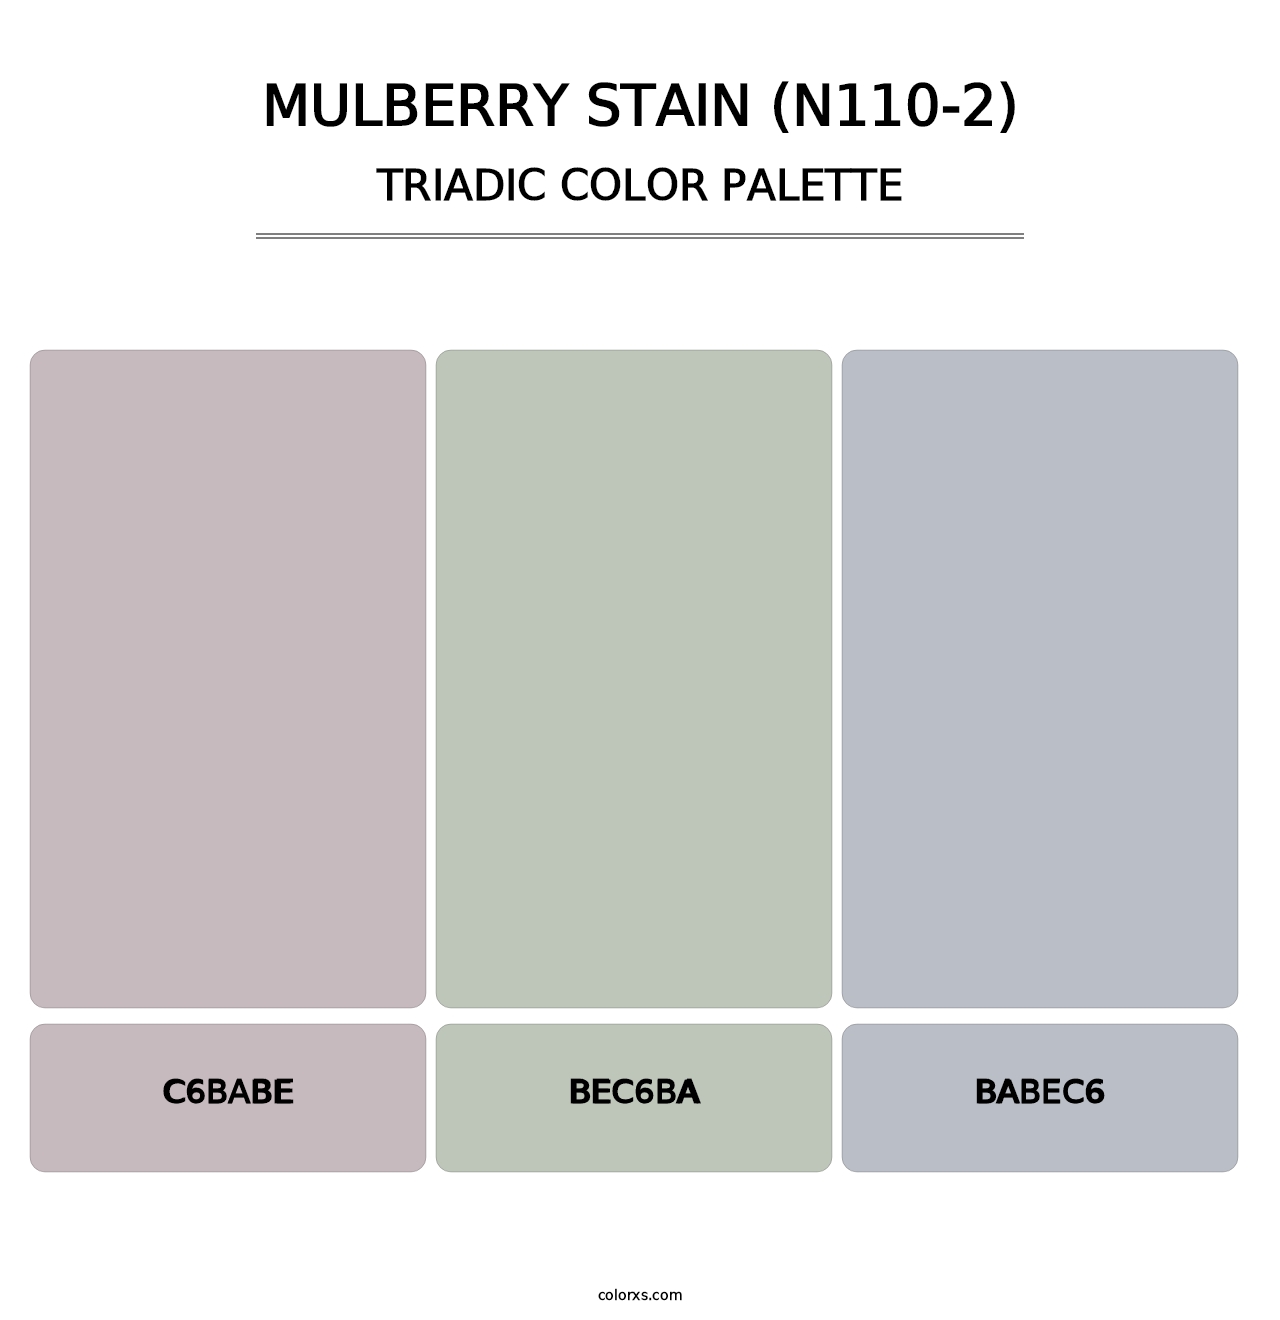 Mulberry Stain (N110-2) - Triadic Color Palette